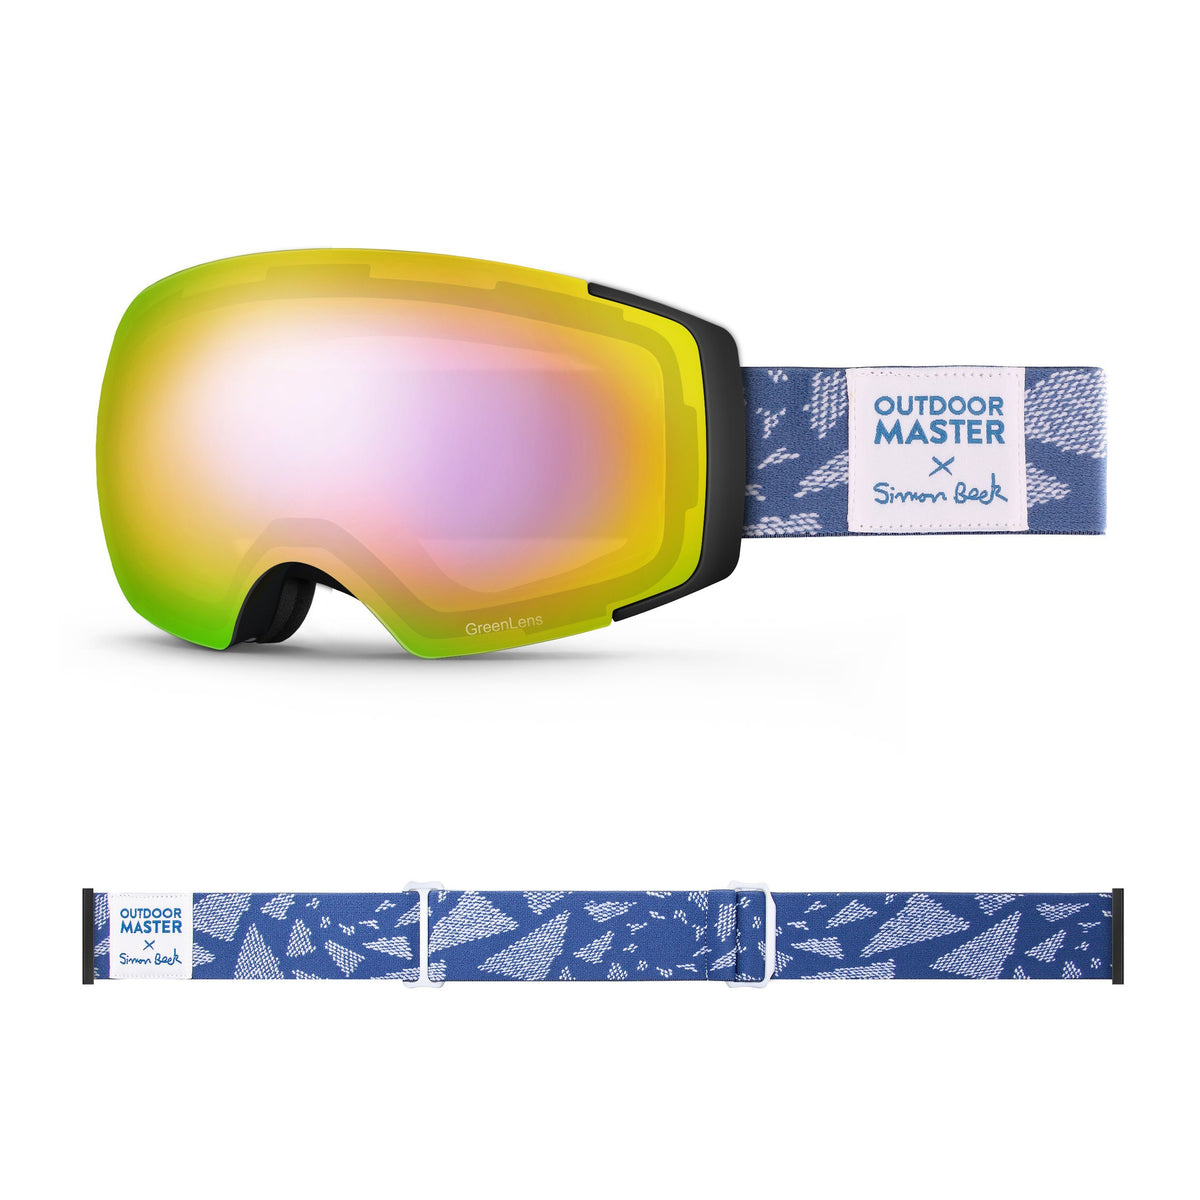 OutdoorMaster x Simon Beck Ski Goggles Pro Series - Snowshoeing Art Limited Edition OutdoorMaster GreenLens VLT 45% TAC Purple with REVO Red Polarized Flying Triangles